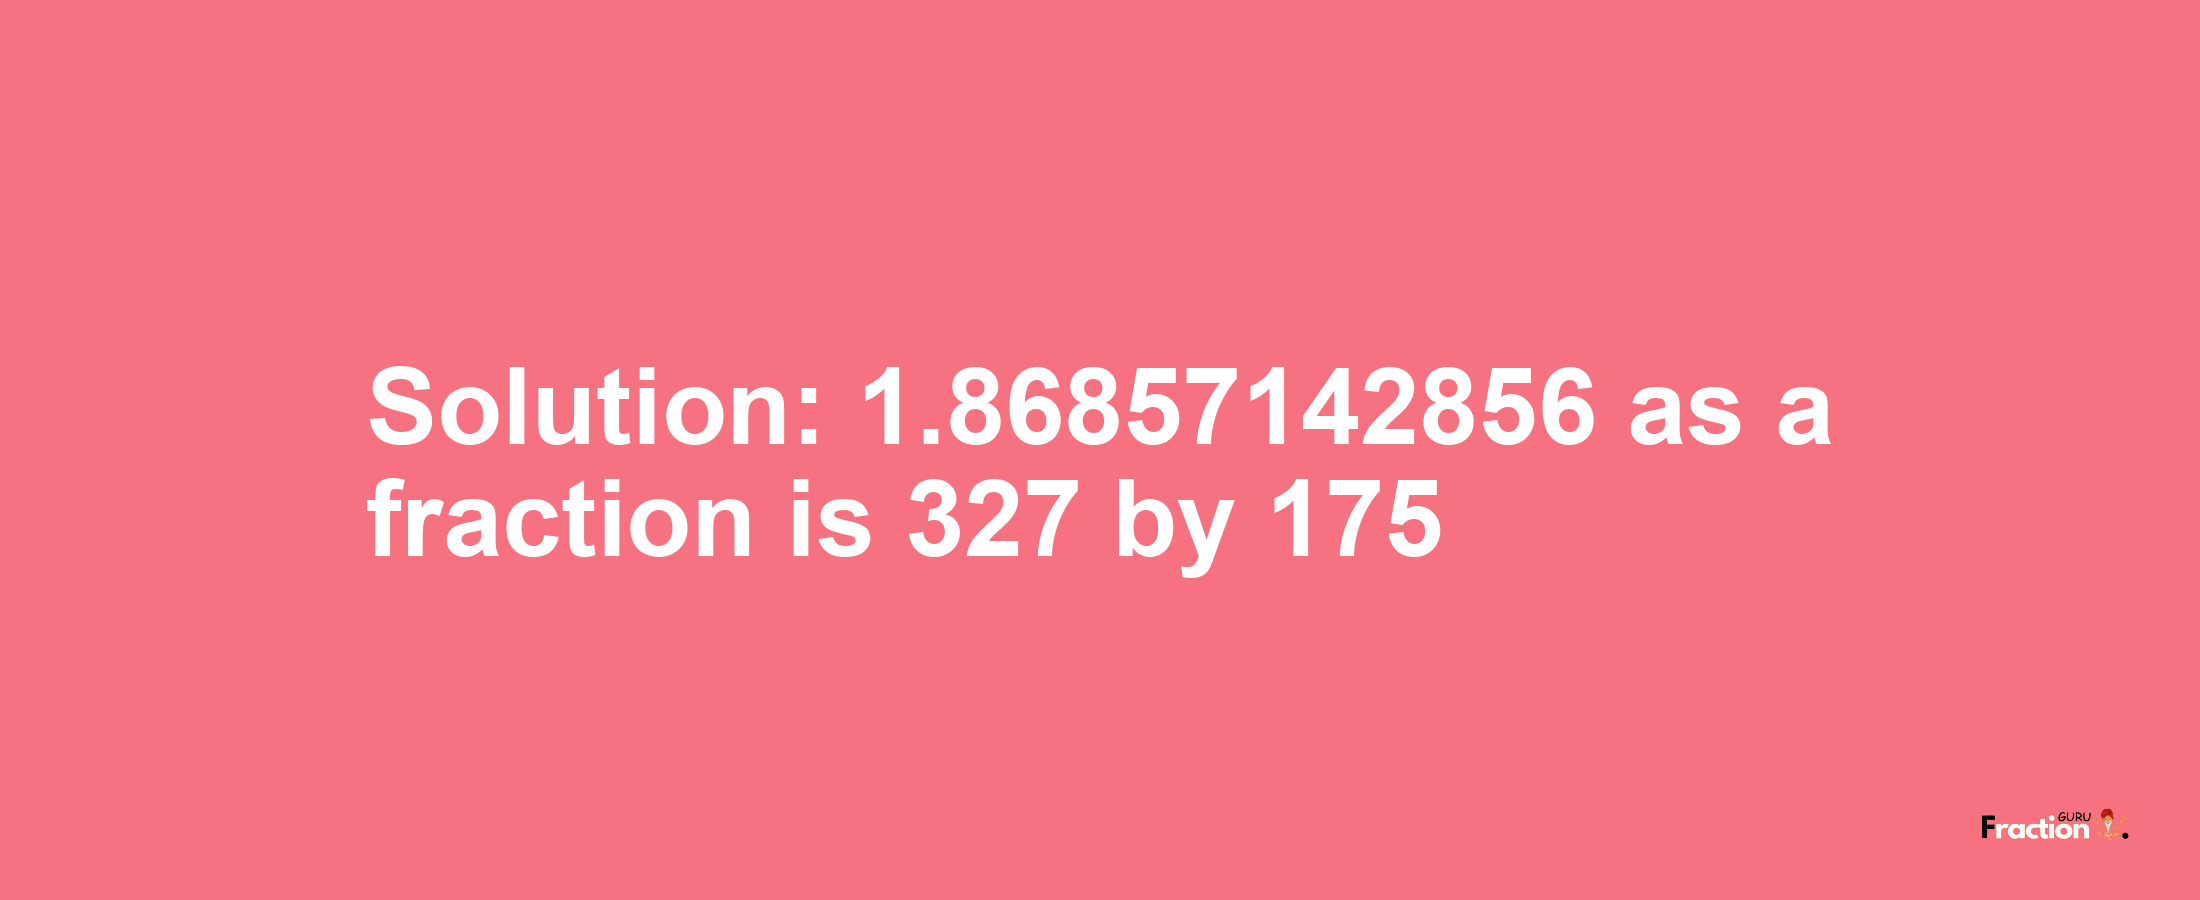 Solution:1.86857142856 as a fraction is 327/175